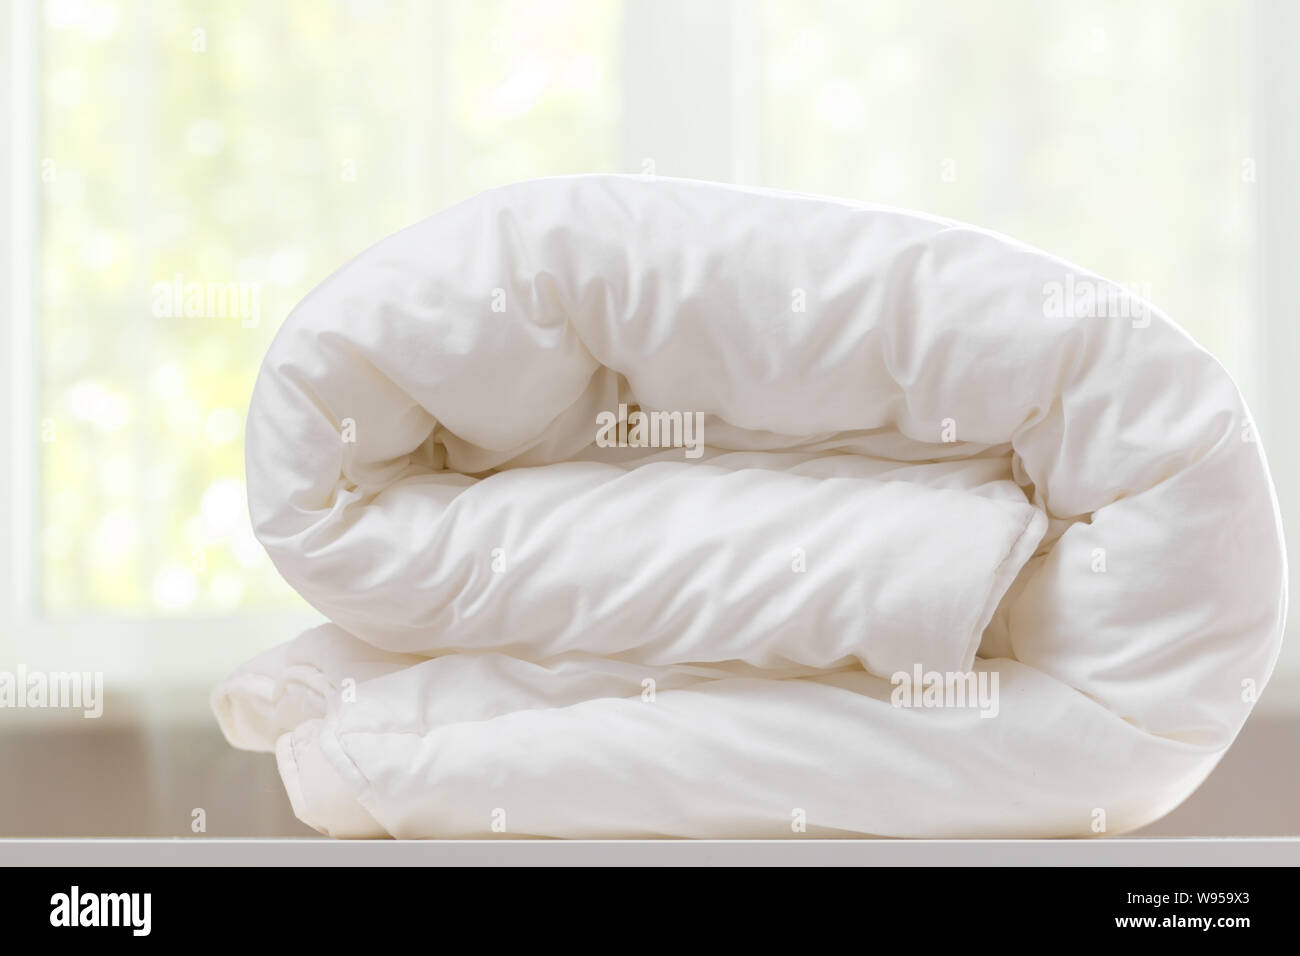 A folded white duvet lies on a table on a blurred background. Stock Photo